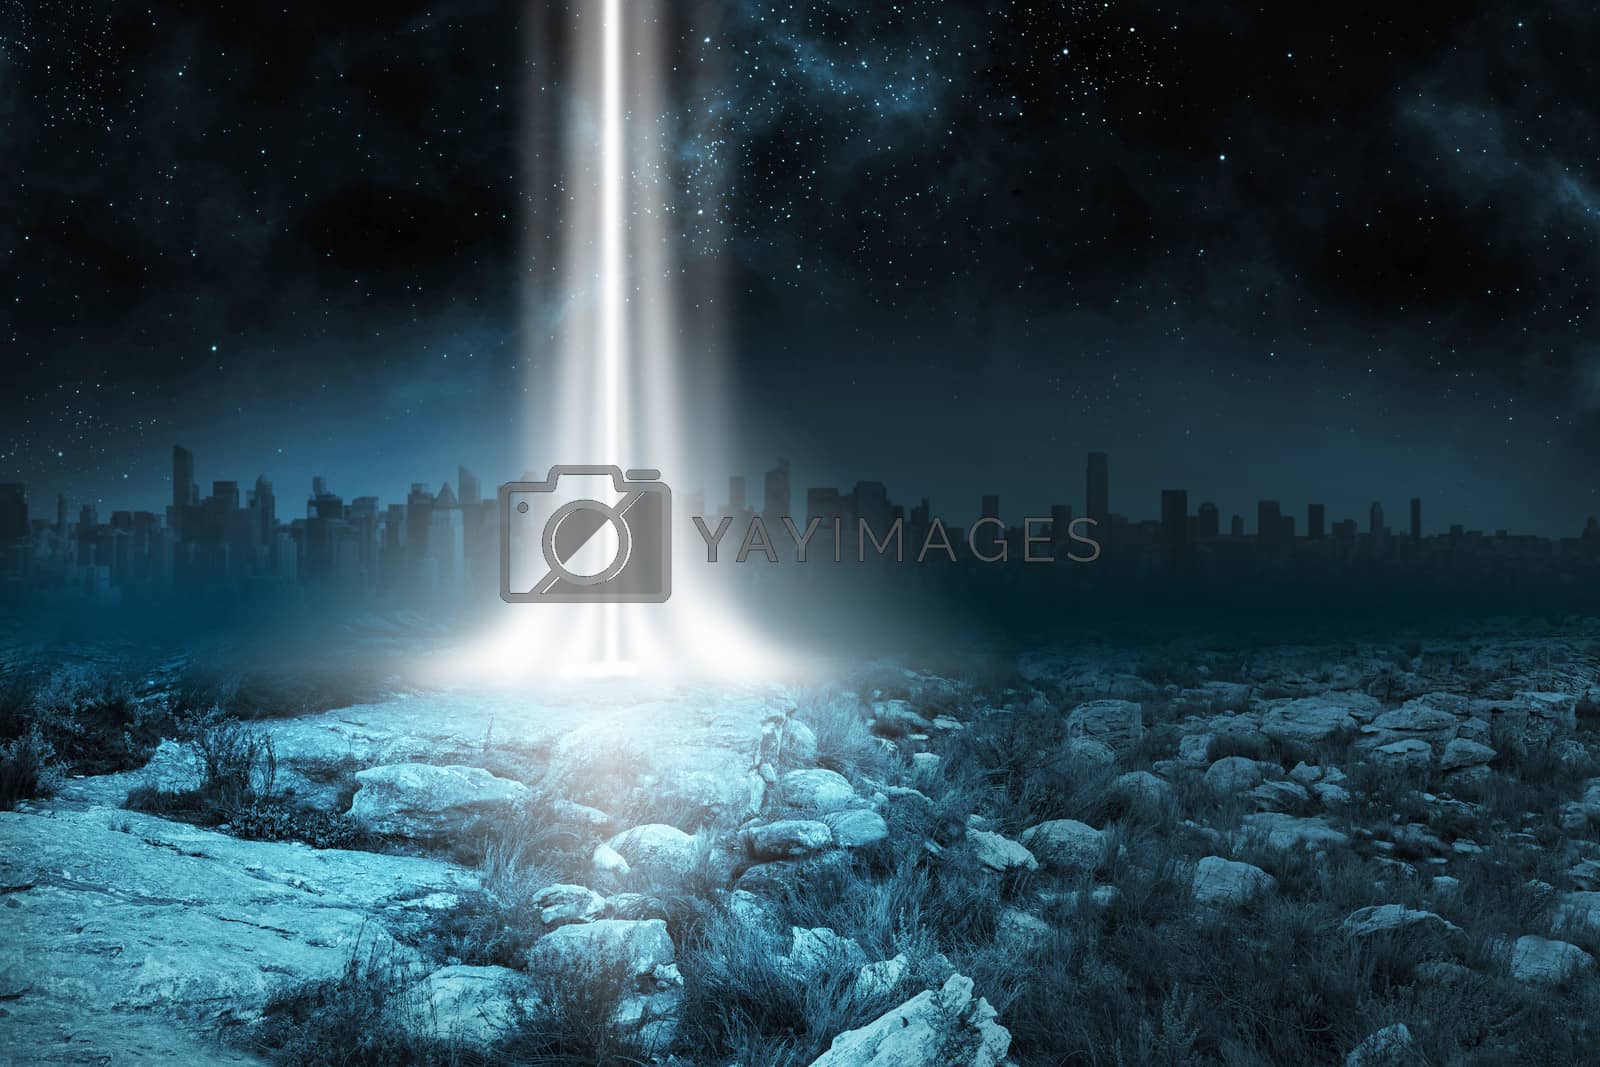 Royalty free image of Rocky landscape with light beam by Wavebreakmedia